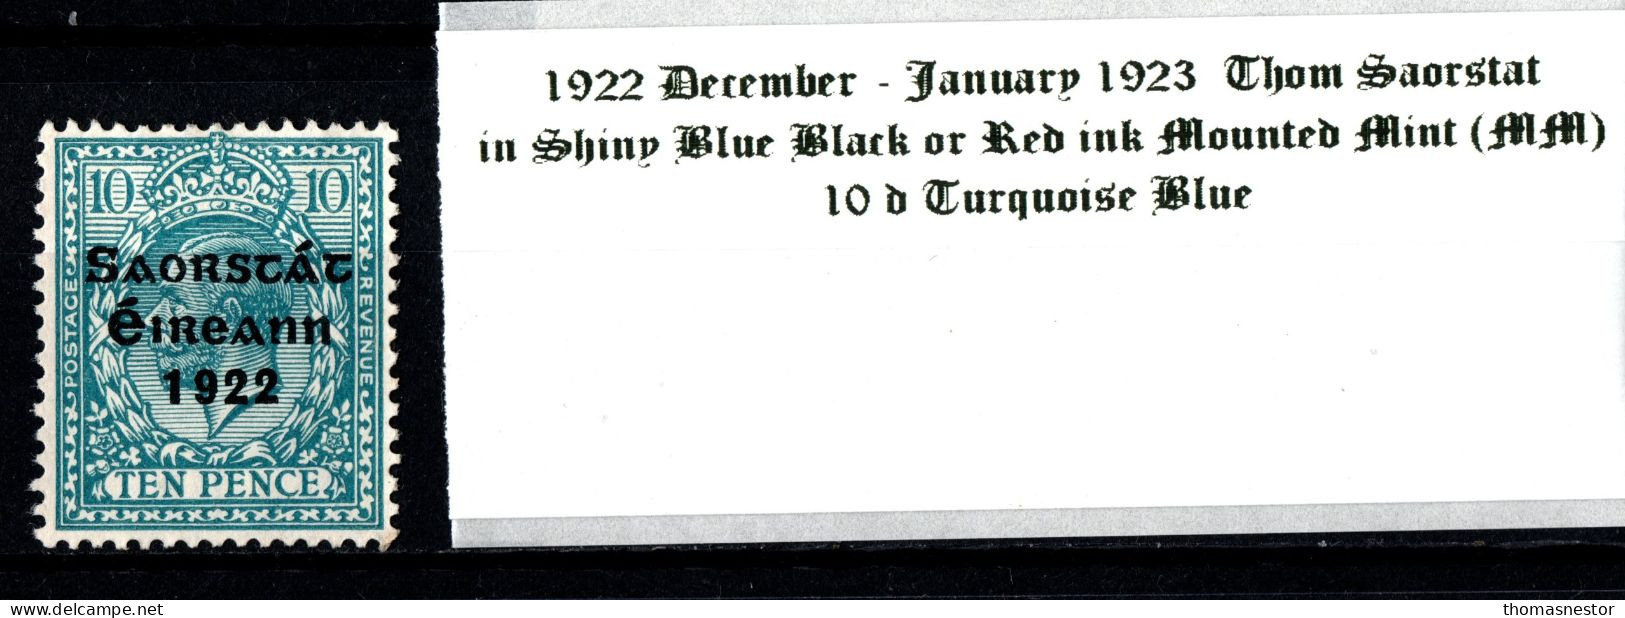 1922 - 1923 December-January Thom Saorstát In Shiny Blue Black Or Red Ink, 10 D Turquoise Blue, Mounted Mint (MM) - Neufs